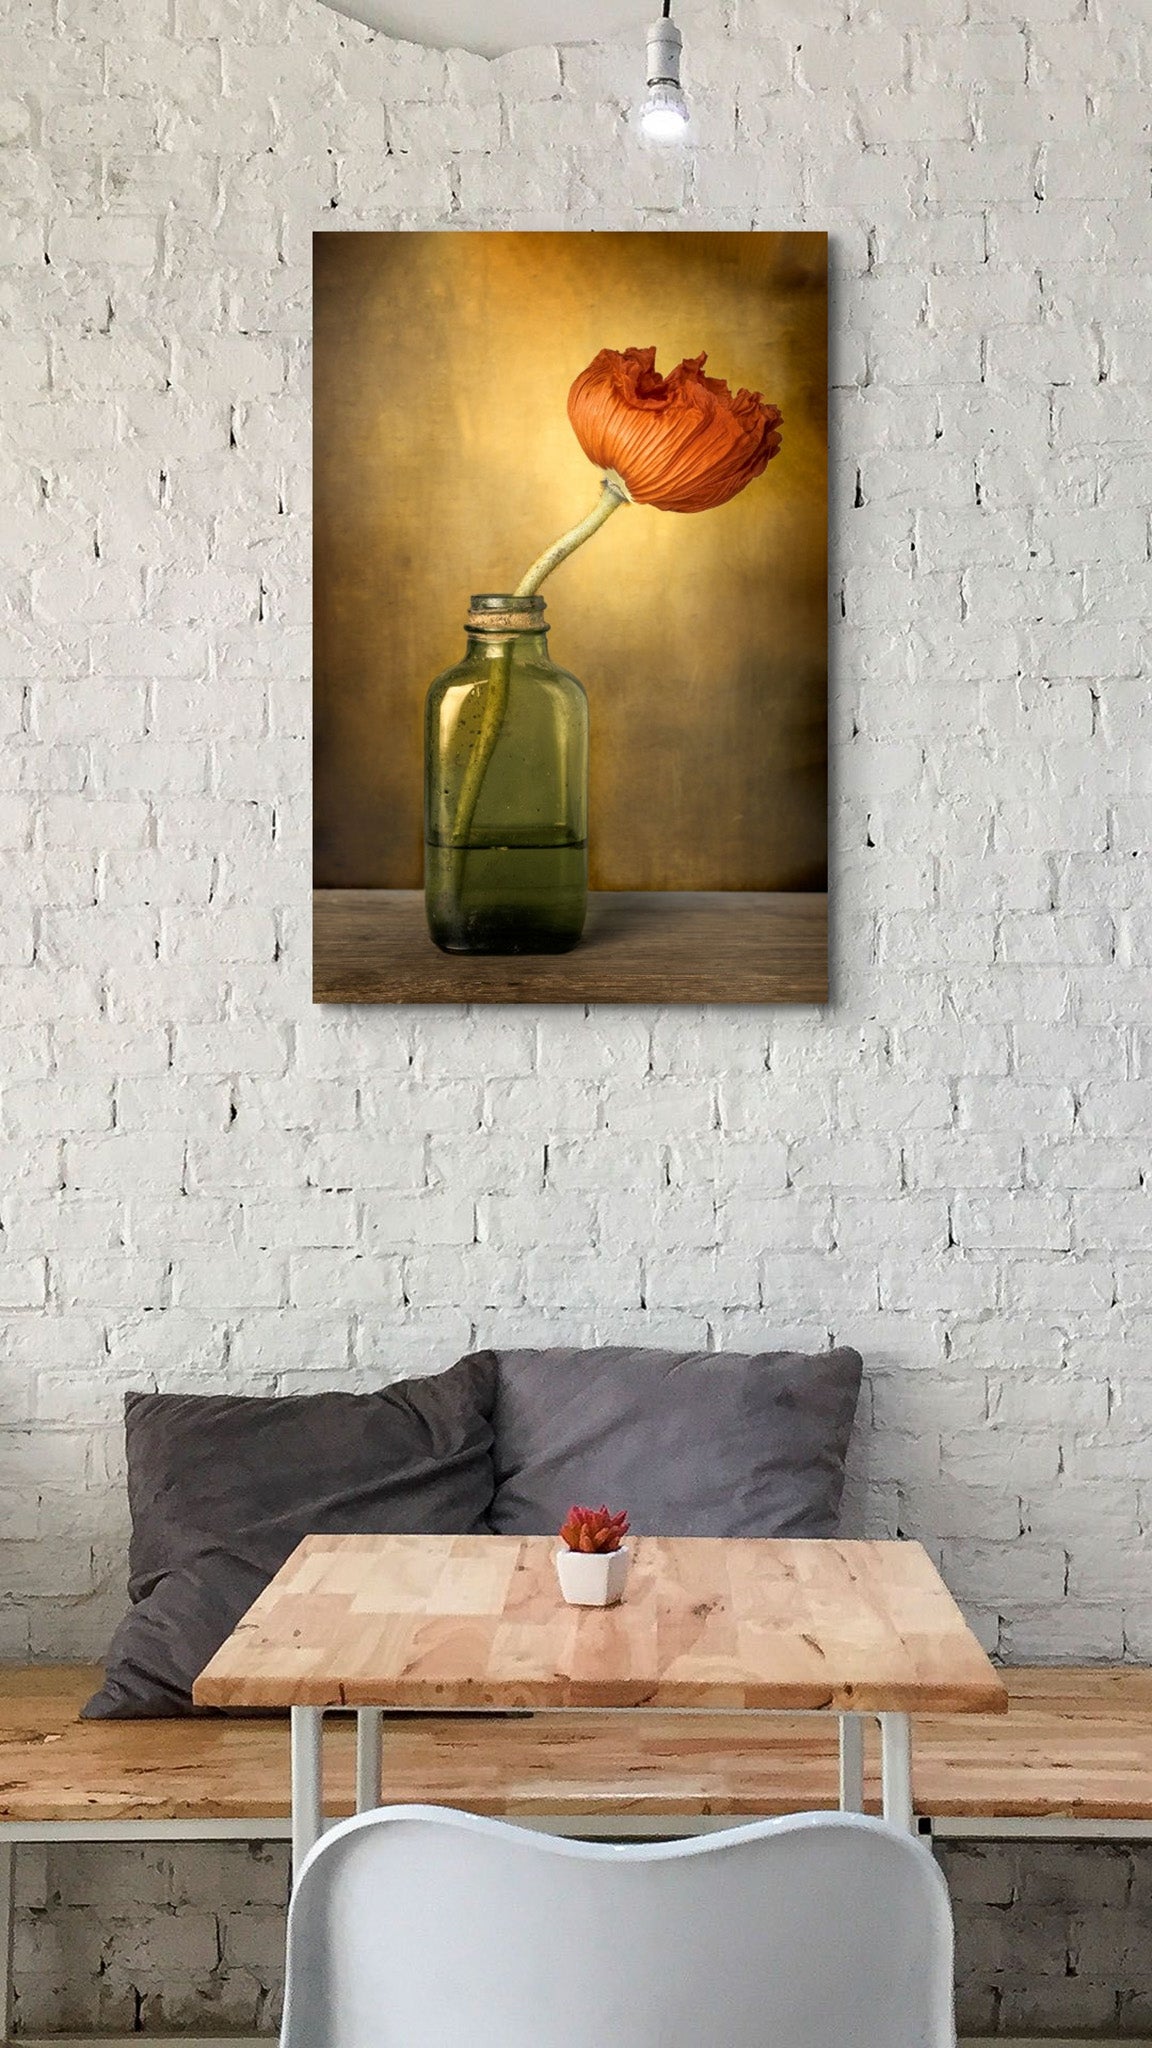 Picture hanging on the wall of a coffee shop. The picture is a fine art flower photograph of a red poppy in a vintage bottle titled "Hope is a Journey" by Cameron Dreaux of Dreaux Fine Art.